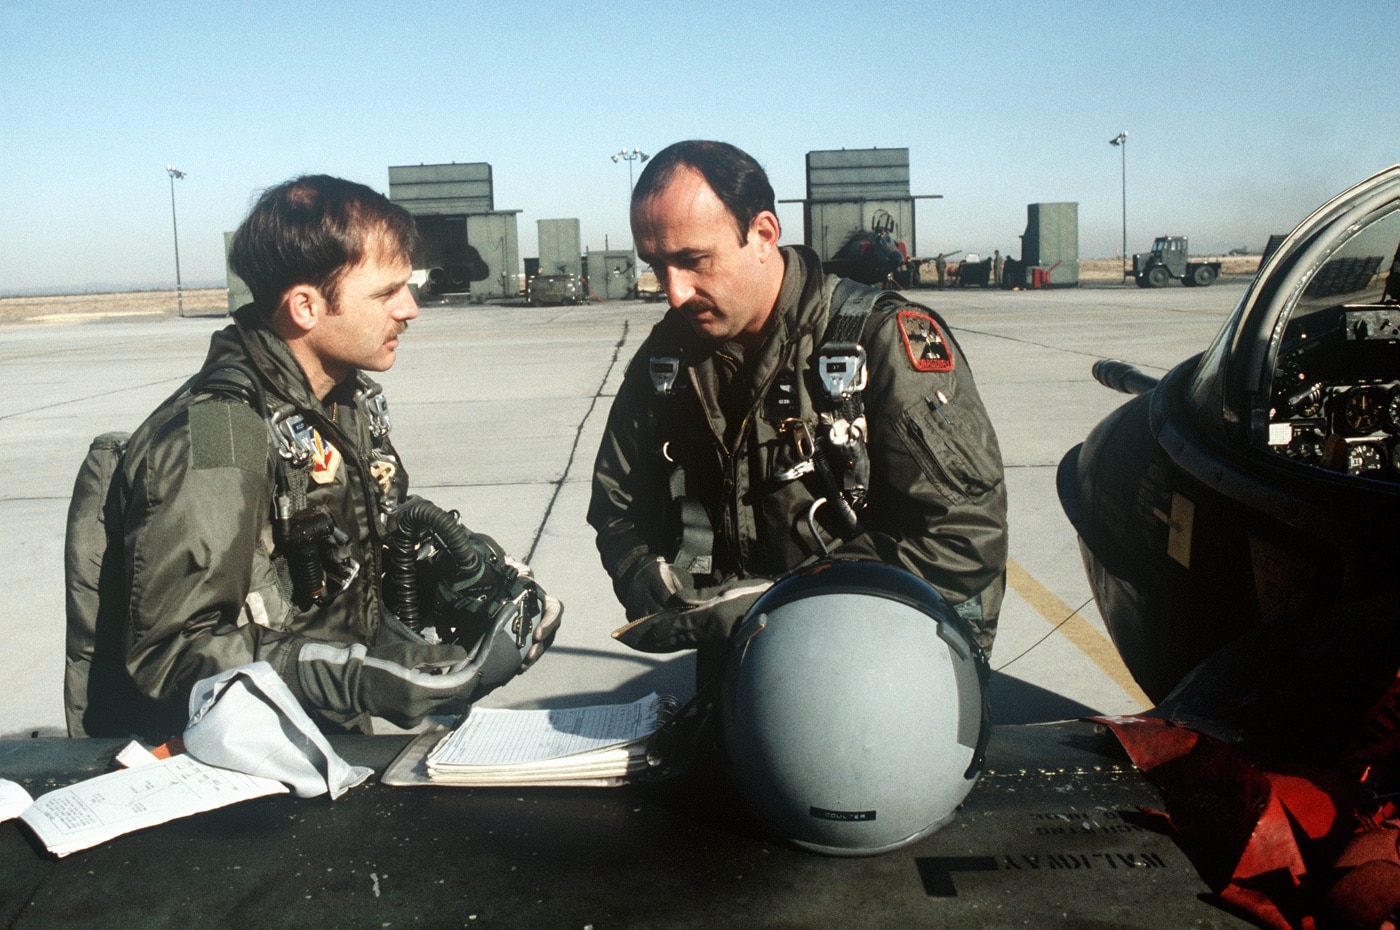 In this photo, we see and aircraft pilot and his co-pilot preparing for a mission in an A-37. An aircraft pilot or aviator is a person who controls the flight of an aircraft by operating its directional flight controls. Some other aircrew members, such as navigators or flight engineers, are also considered aviators because they are involved in operating the aircraft's navigation and engine systems.